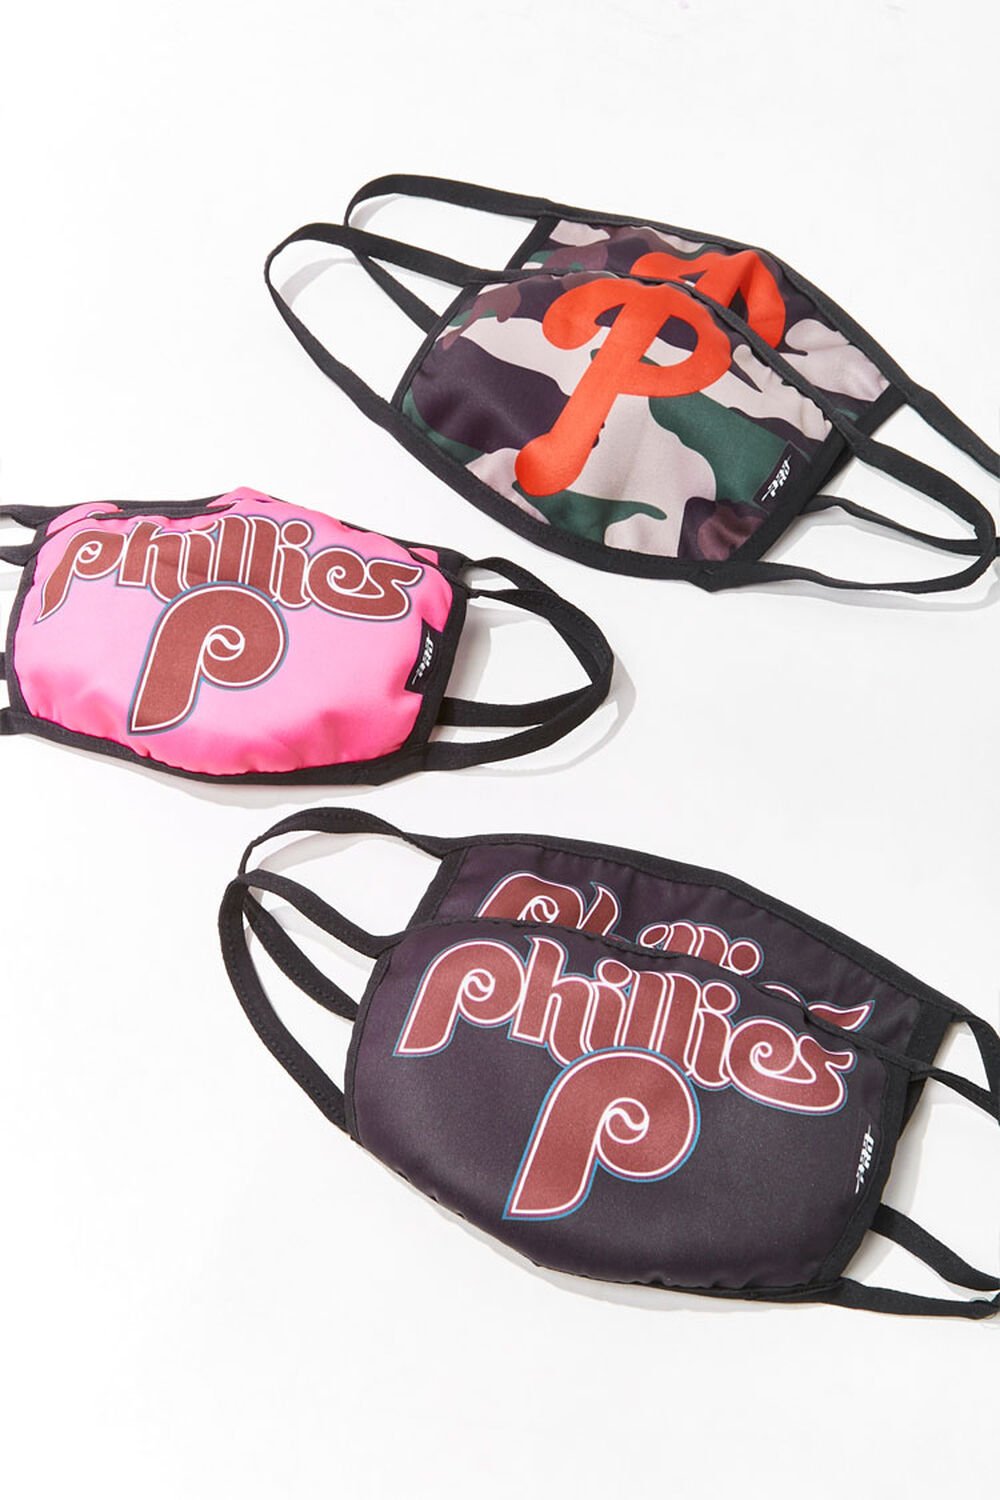 Phillies Face Mask Set - Assorted 2 Pack, image 1